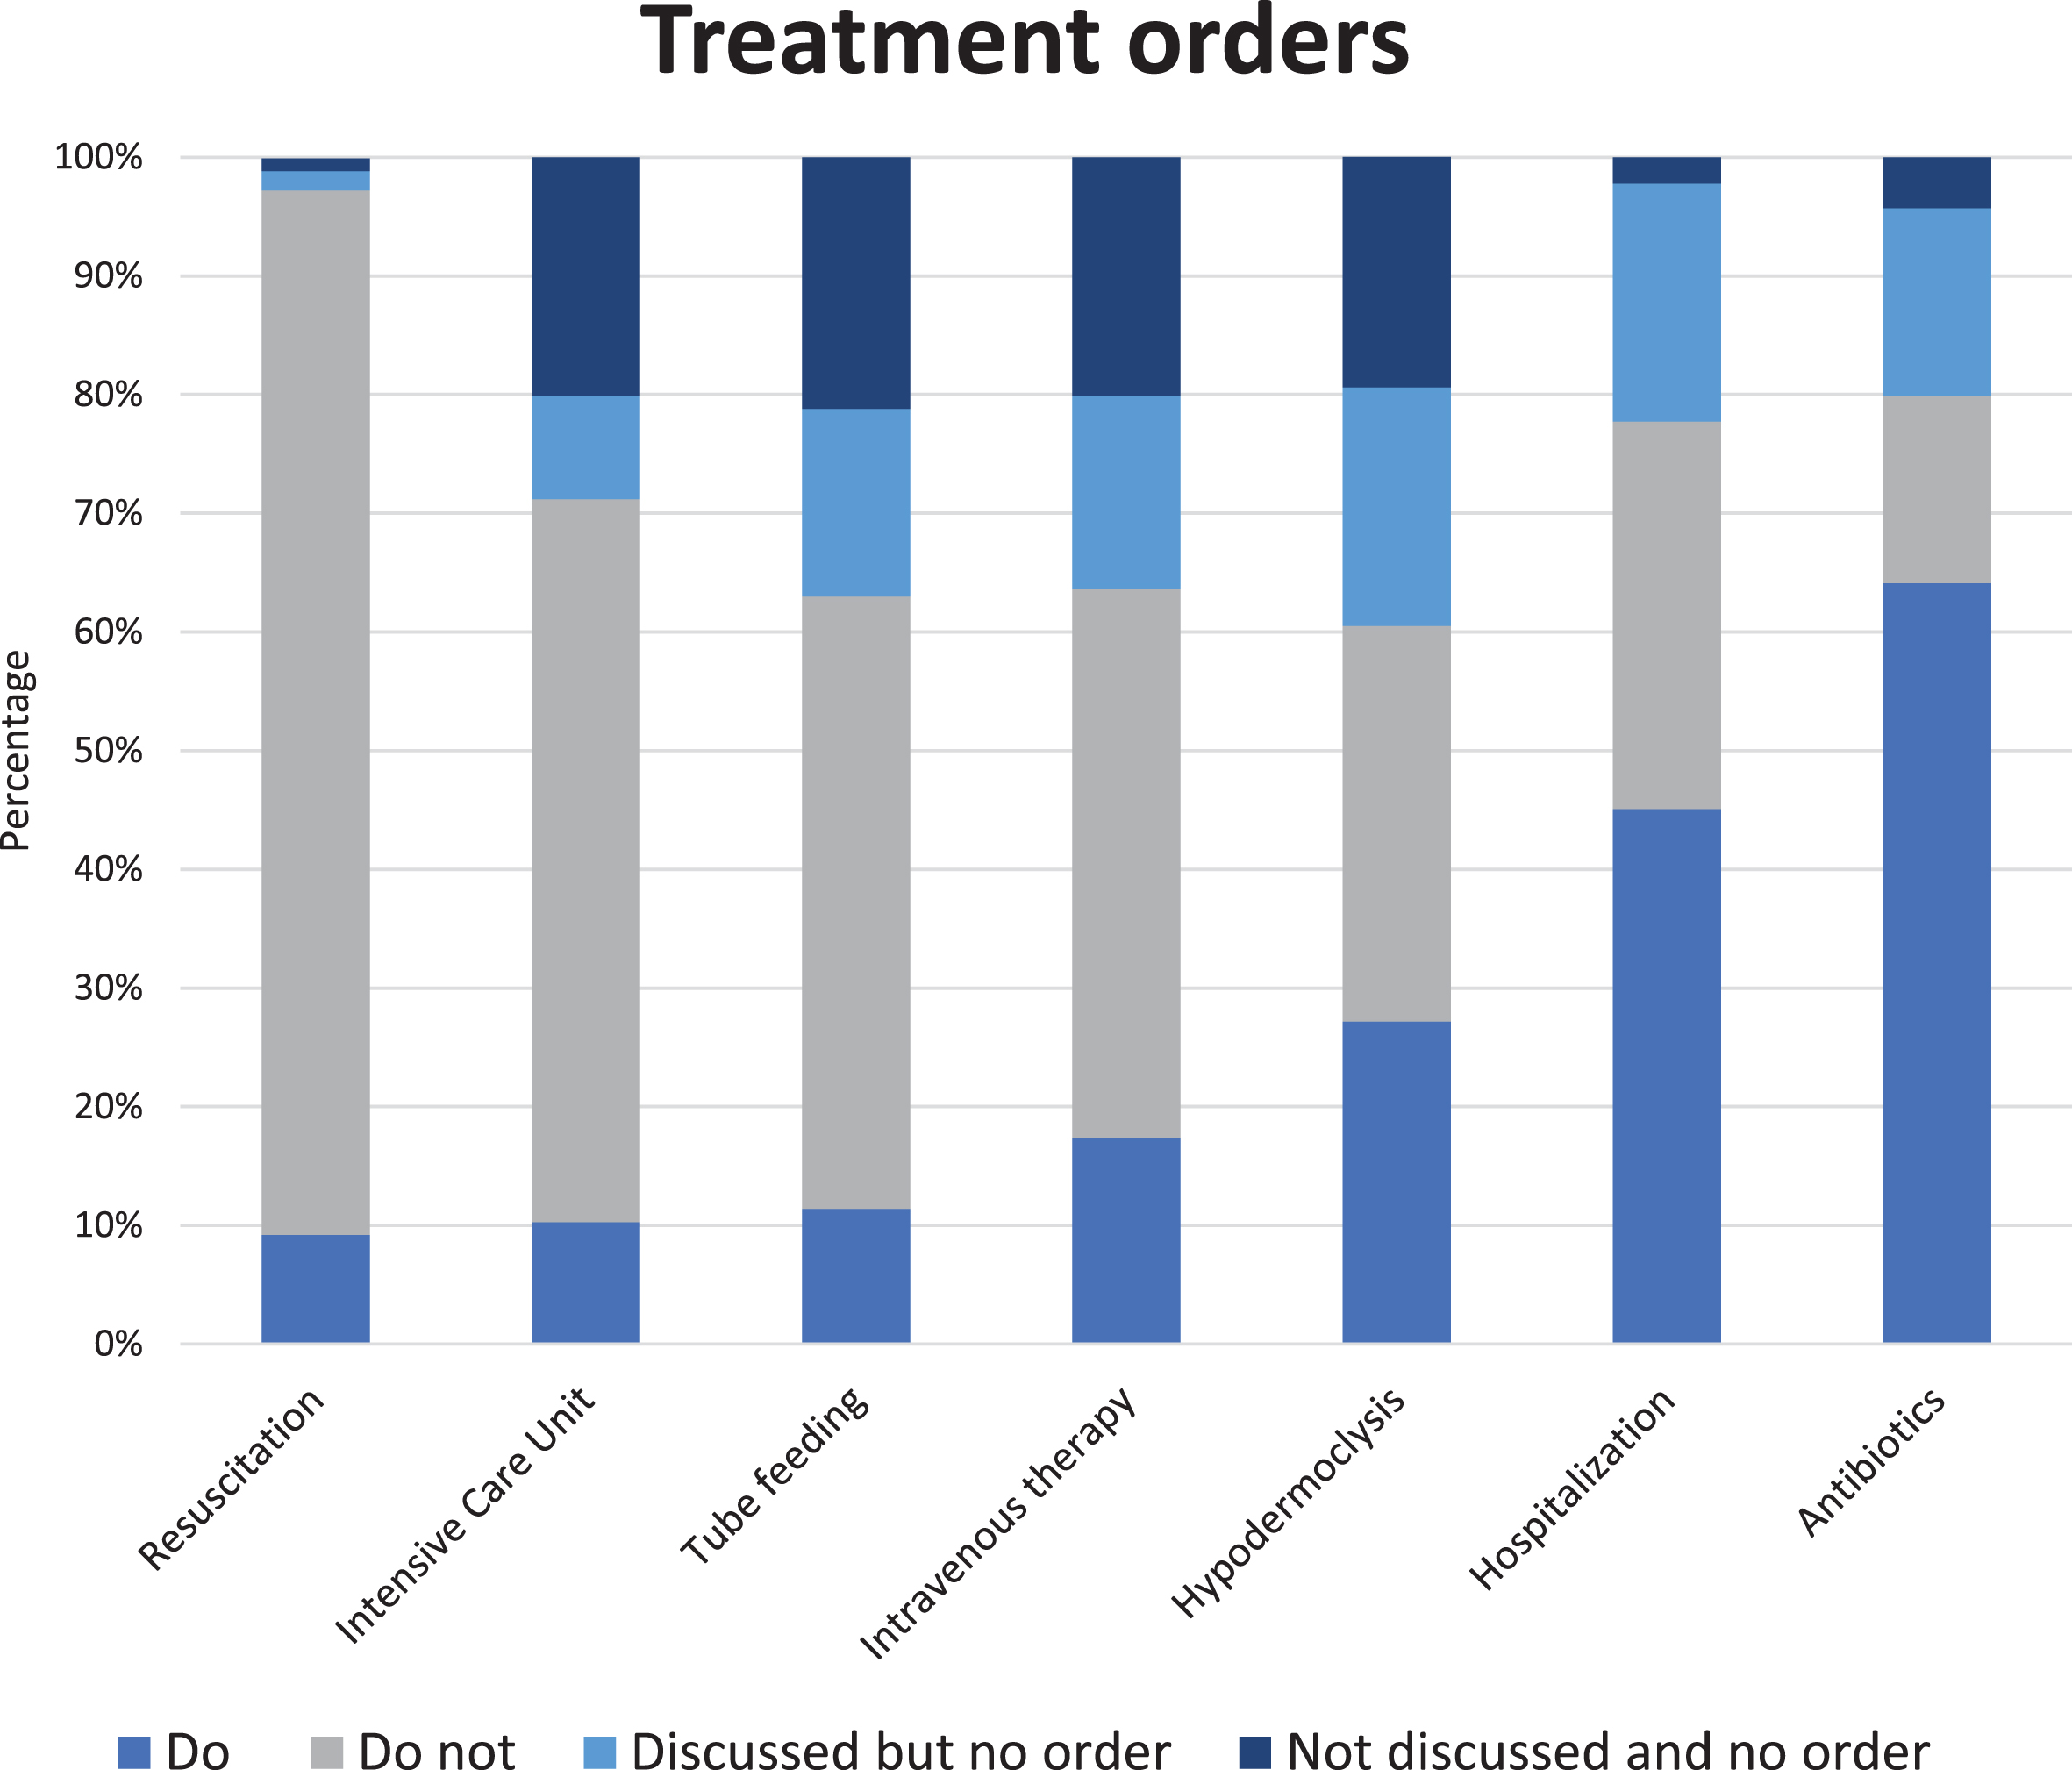 Percentages (N = 184) of specific advance treatment orders. Percentage ‘do-not-treat’ order per type of treatment in descending order: resuscitation 88.0%, intensive care unit 60.9%, tube feeding 51.6%, intravenous therapy 46.2%, hypodermoclysis 33.3%, hospitalization 32.6%, and use of antibiotics 15.8%; we refer to Supplementary Table 2 for percentages of all answer options, including from residents with advanced dementia, presented separately.